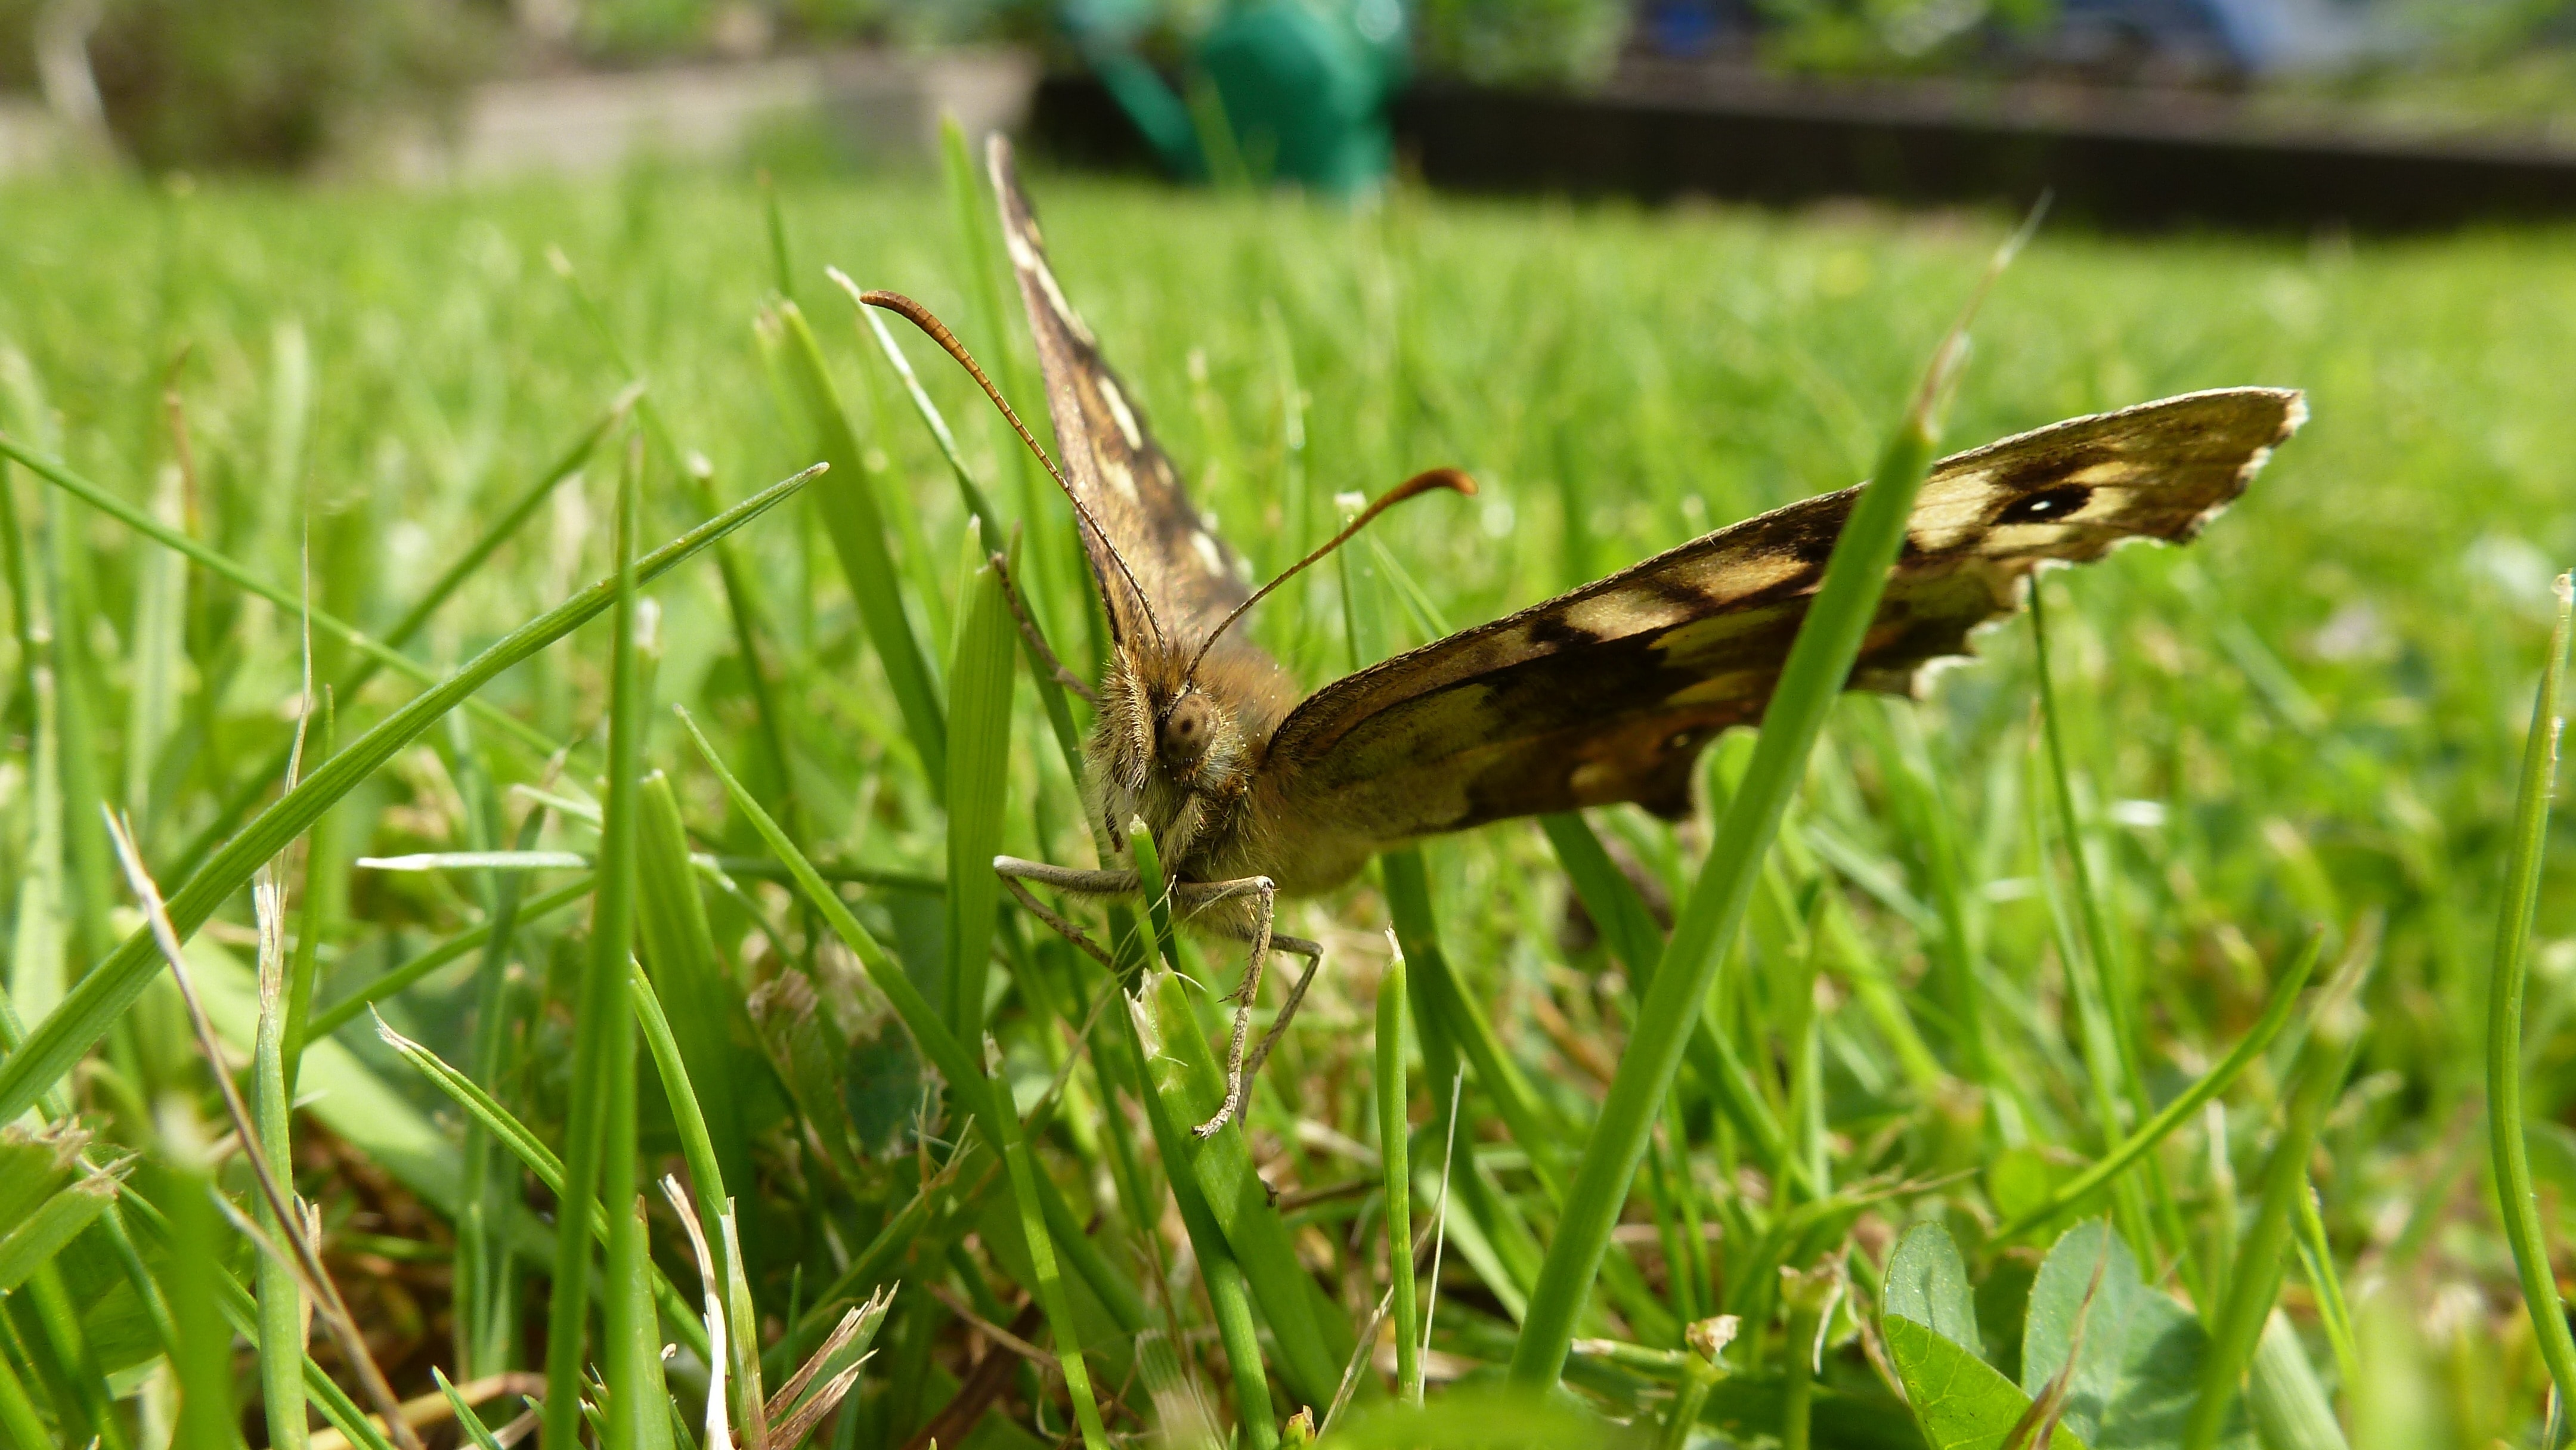 close-up photo of brown, black, and beige butterfly on green grass